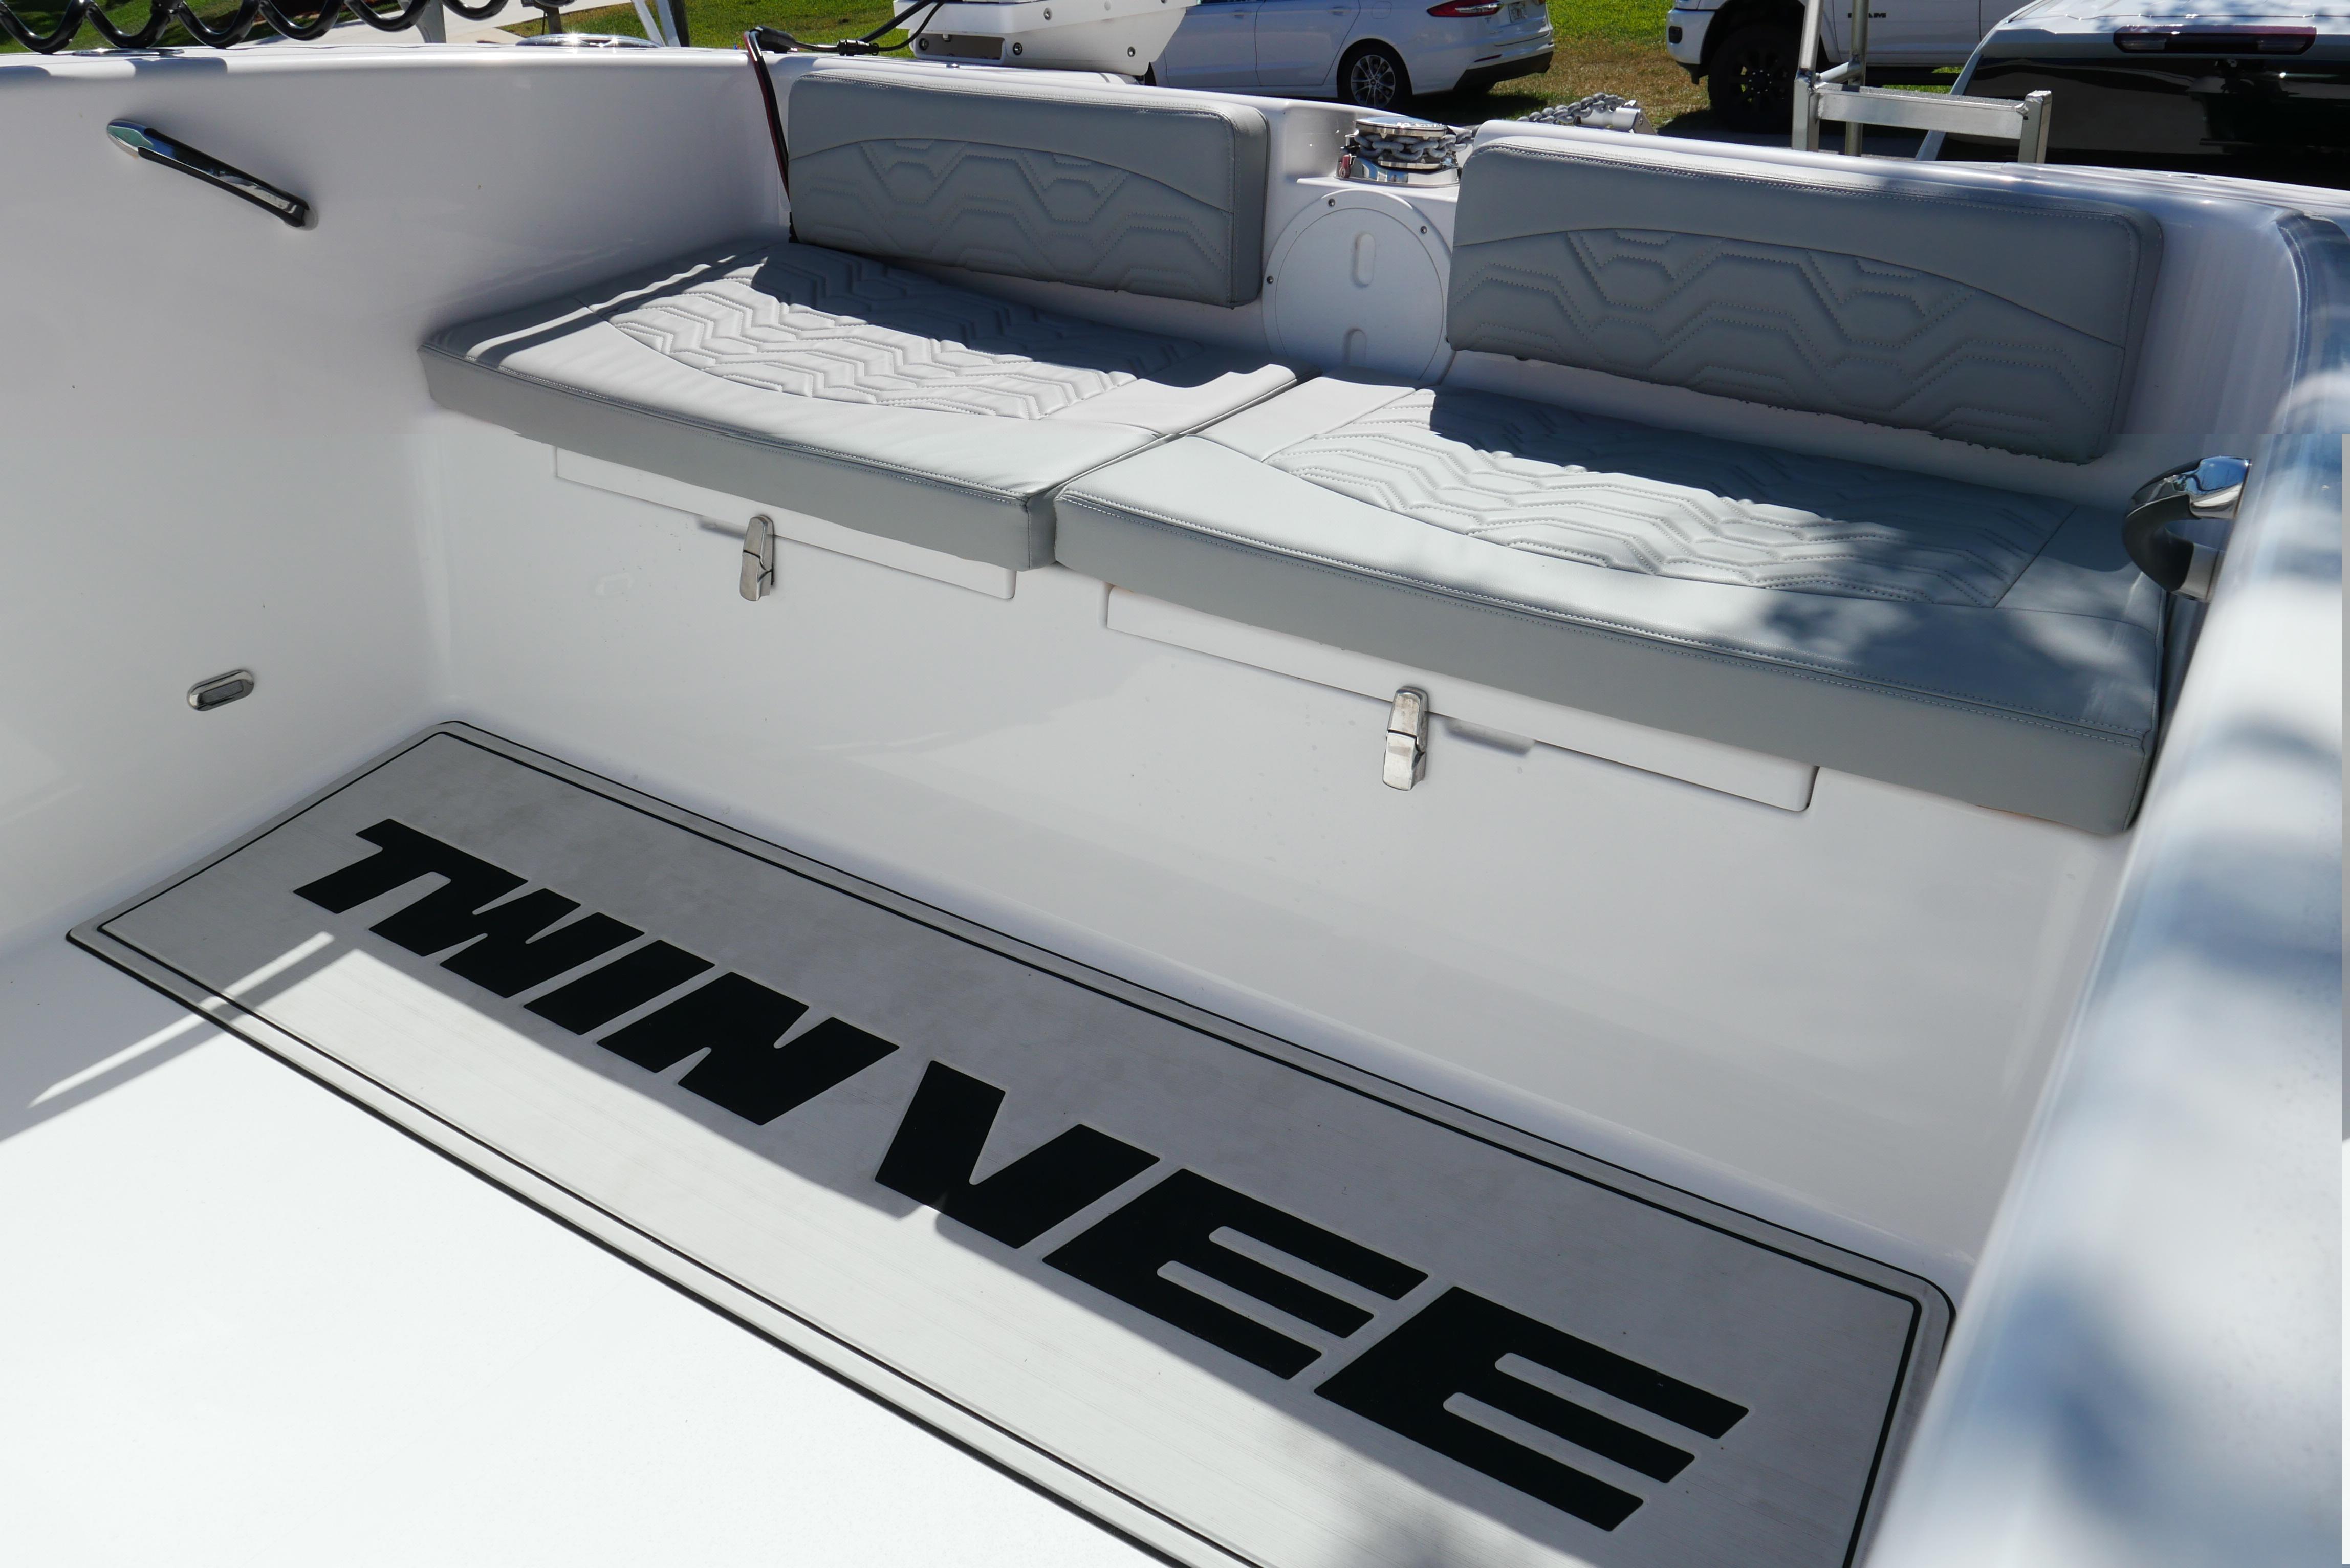 Twin Vee 26 - Bow seating